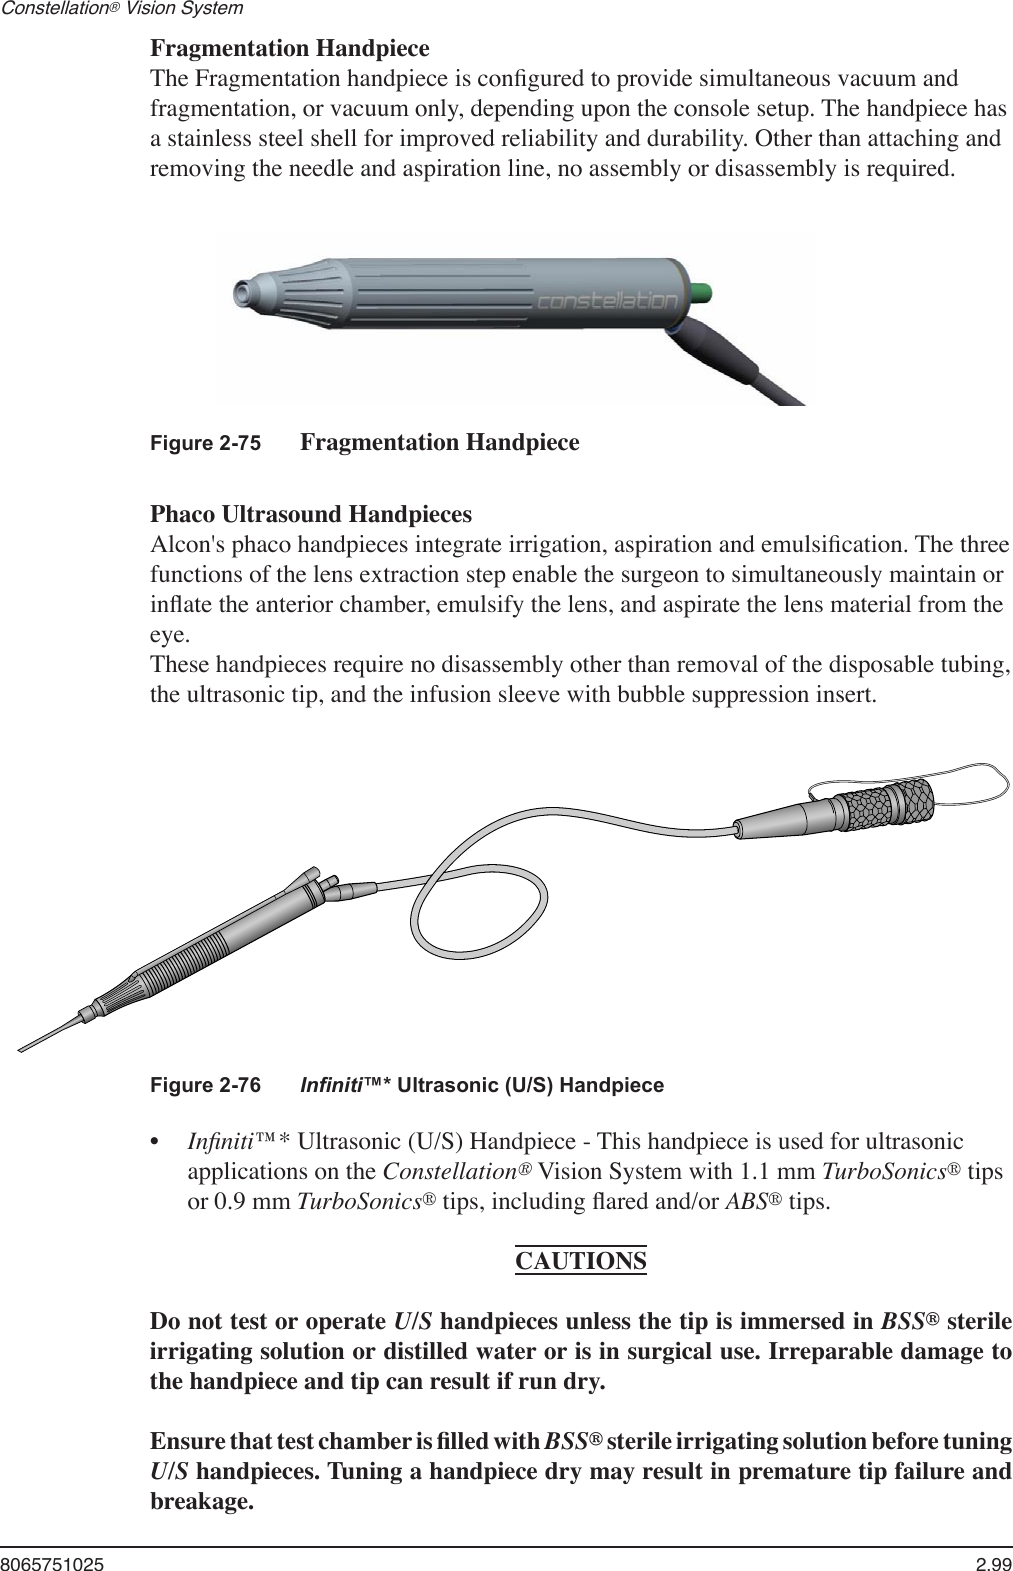 8065751025  2.99Constellation® Vision System   Fragmentation Handpiece  The Fragmentation handpiece is conﬁgured to provide simultaneous vacuum and fragmentation, or vacuum only, depending upon the console setup. The handpiece has a stainless steel shell for improved reliability and durability. Other than attaching and removing the needle and aspiration line, no assembly or disassembly is required.Figure 2-75  Fragmentation Handpiece     Phaco Ultrasound Handpieces  Alcon&apos;s phaco handpieces integrate irrigation, aspiration and emulsiﬁcation. The three functions of the lens extraction step enable the surgeon to simultaneously maintain or inﬂate the anterior chamber, emulsify the lens, and aspirate the lens material from the eye.  These handpieces require no disassembly other than removal of the disposable tubing, the ultrasonic tip, and the infusion sleeve with bubble suppression insert.Figure 2-76  Inﬁniti™* Ultrasonic (U/S) Handpiece •  Inﬁniti™* Ultrasonic (U/S) Handpiece - This handpiece is used for ultrasonic applications on the Constellation® Vision System with 1.1 mm TurboSonics® tips or 0.9 mm TurboSonics® tips, including ﬂared and/or ABS® tips.CAUTIONSDo not test or operate U/S handpieces unless the tip is immersed in BSS® sterile irrigating solution or distilled water or is in surgical use. Irreparable damage to the handpiece and tip can result if run dry.Ensure that test chamber is ﬁlled with BSS® sterile irrigating solution before tuning U/S handpieces. Tuning a handpiece dry may result in premature tip failure and breakage.